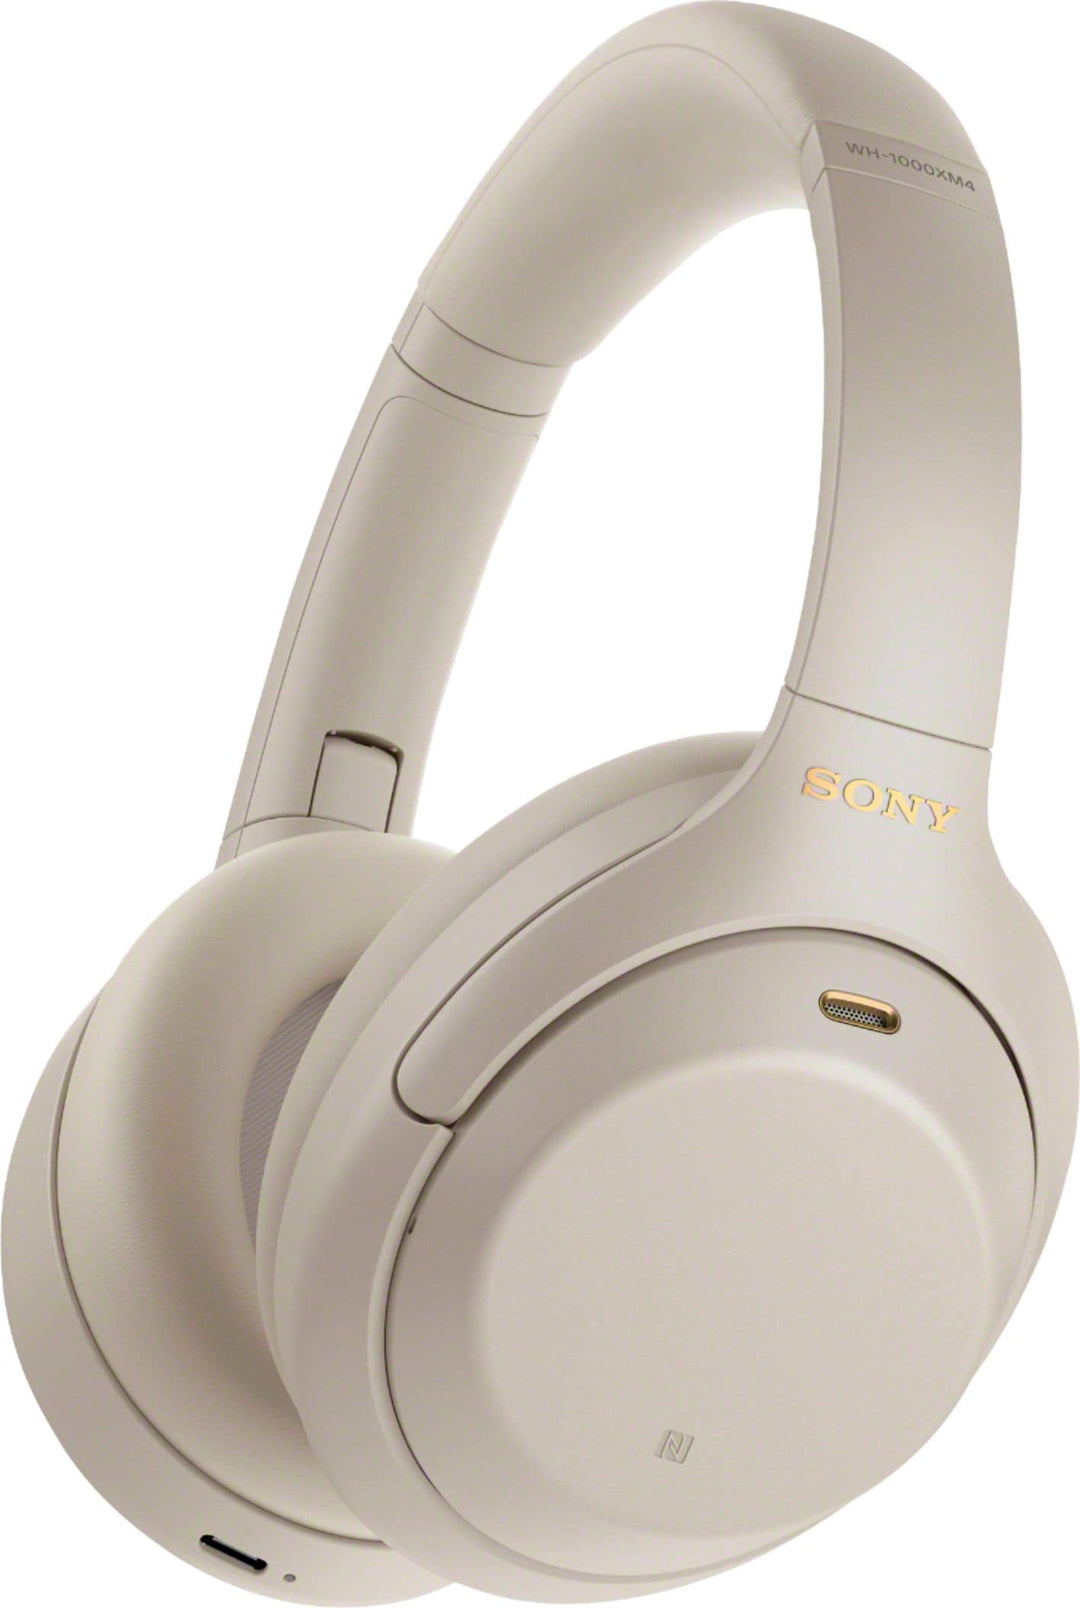 Sony - WH-1000XM4 Wireless Noise-Cancelling Over-the-Ear Headphones - Silver_0